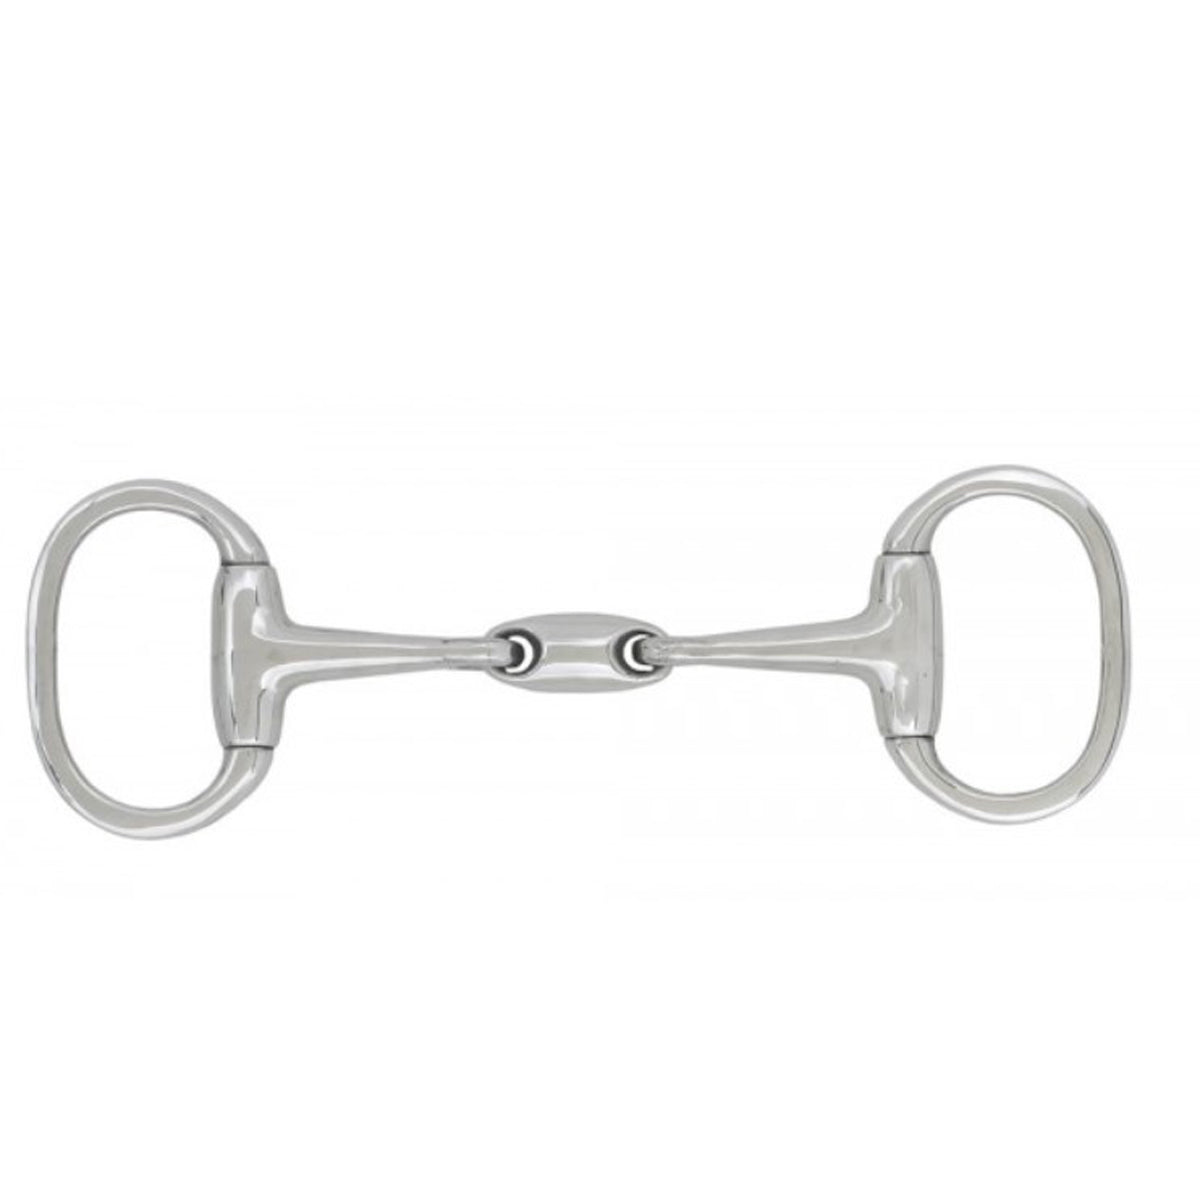 Centaur Stainless Steel Eggbutt with Oval Mouth Bit